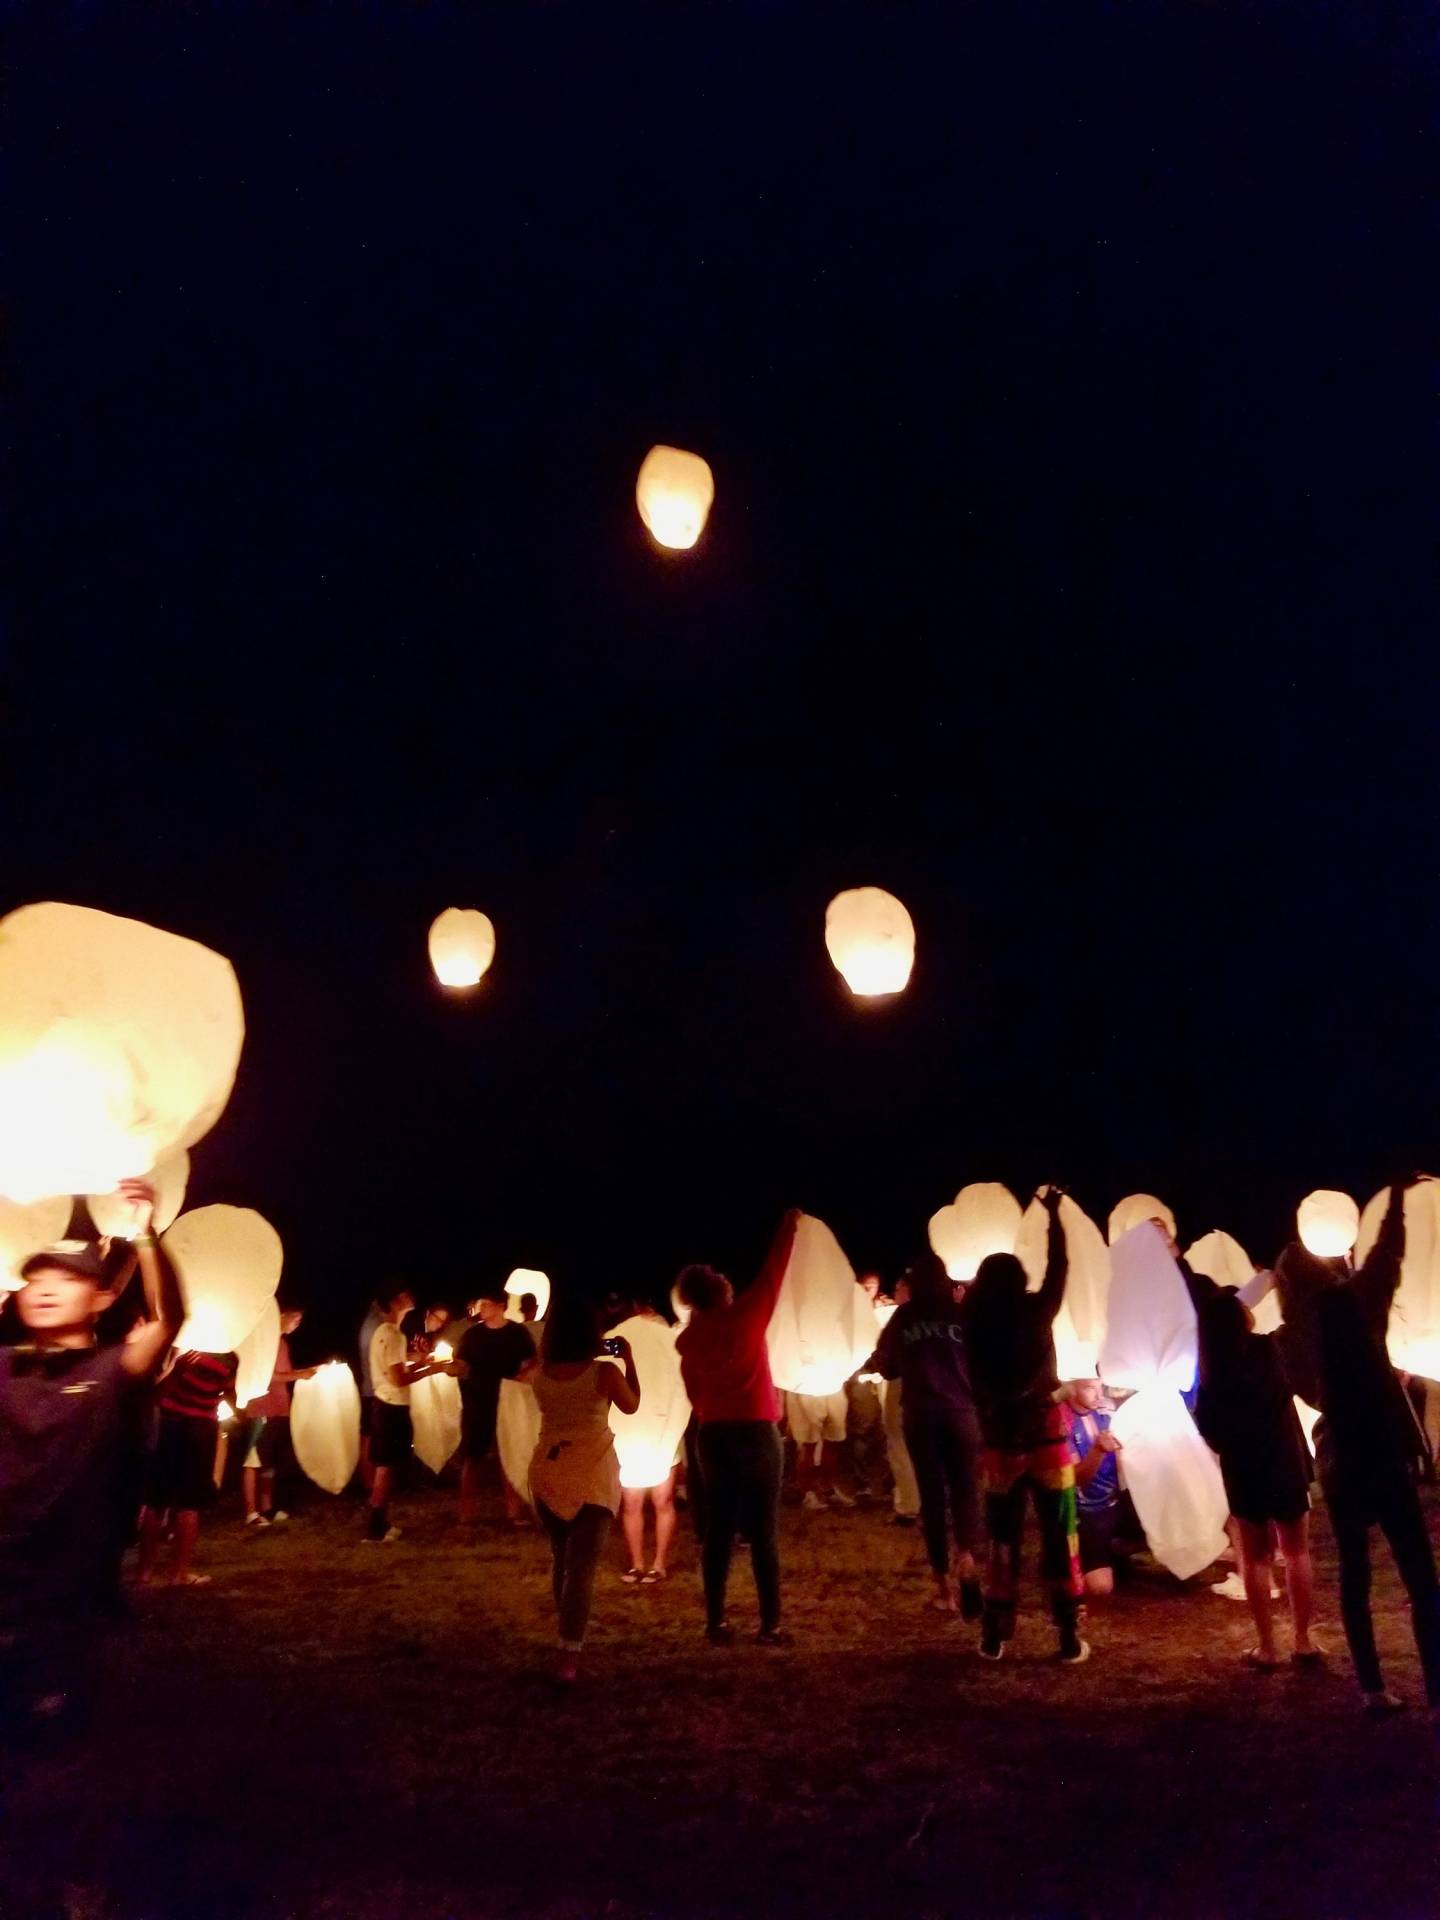 Campers releasing paper lanterns into the sky